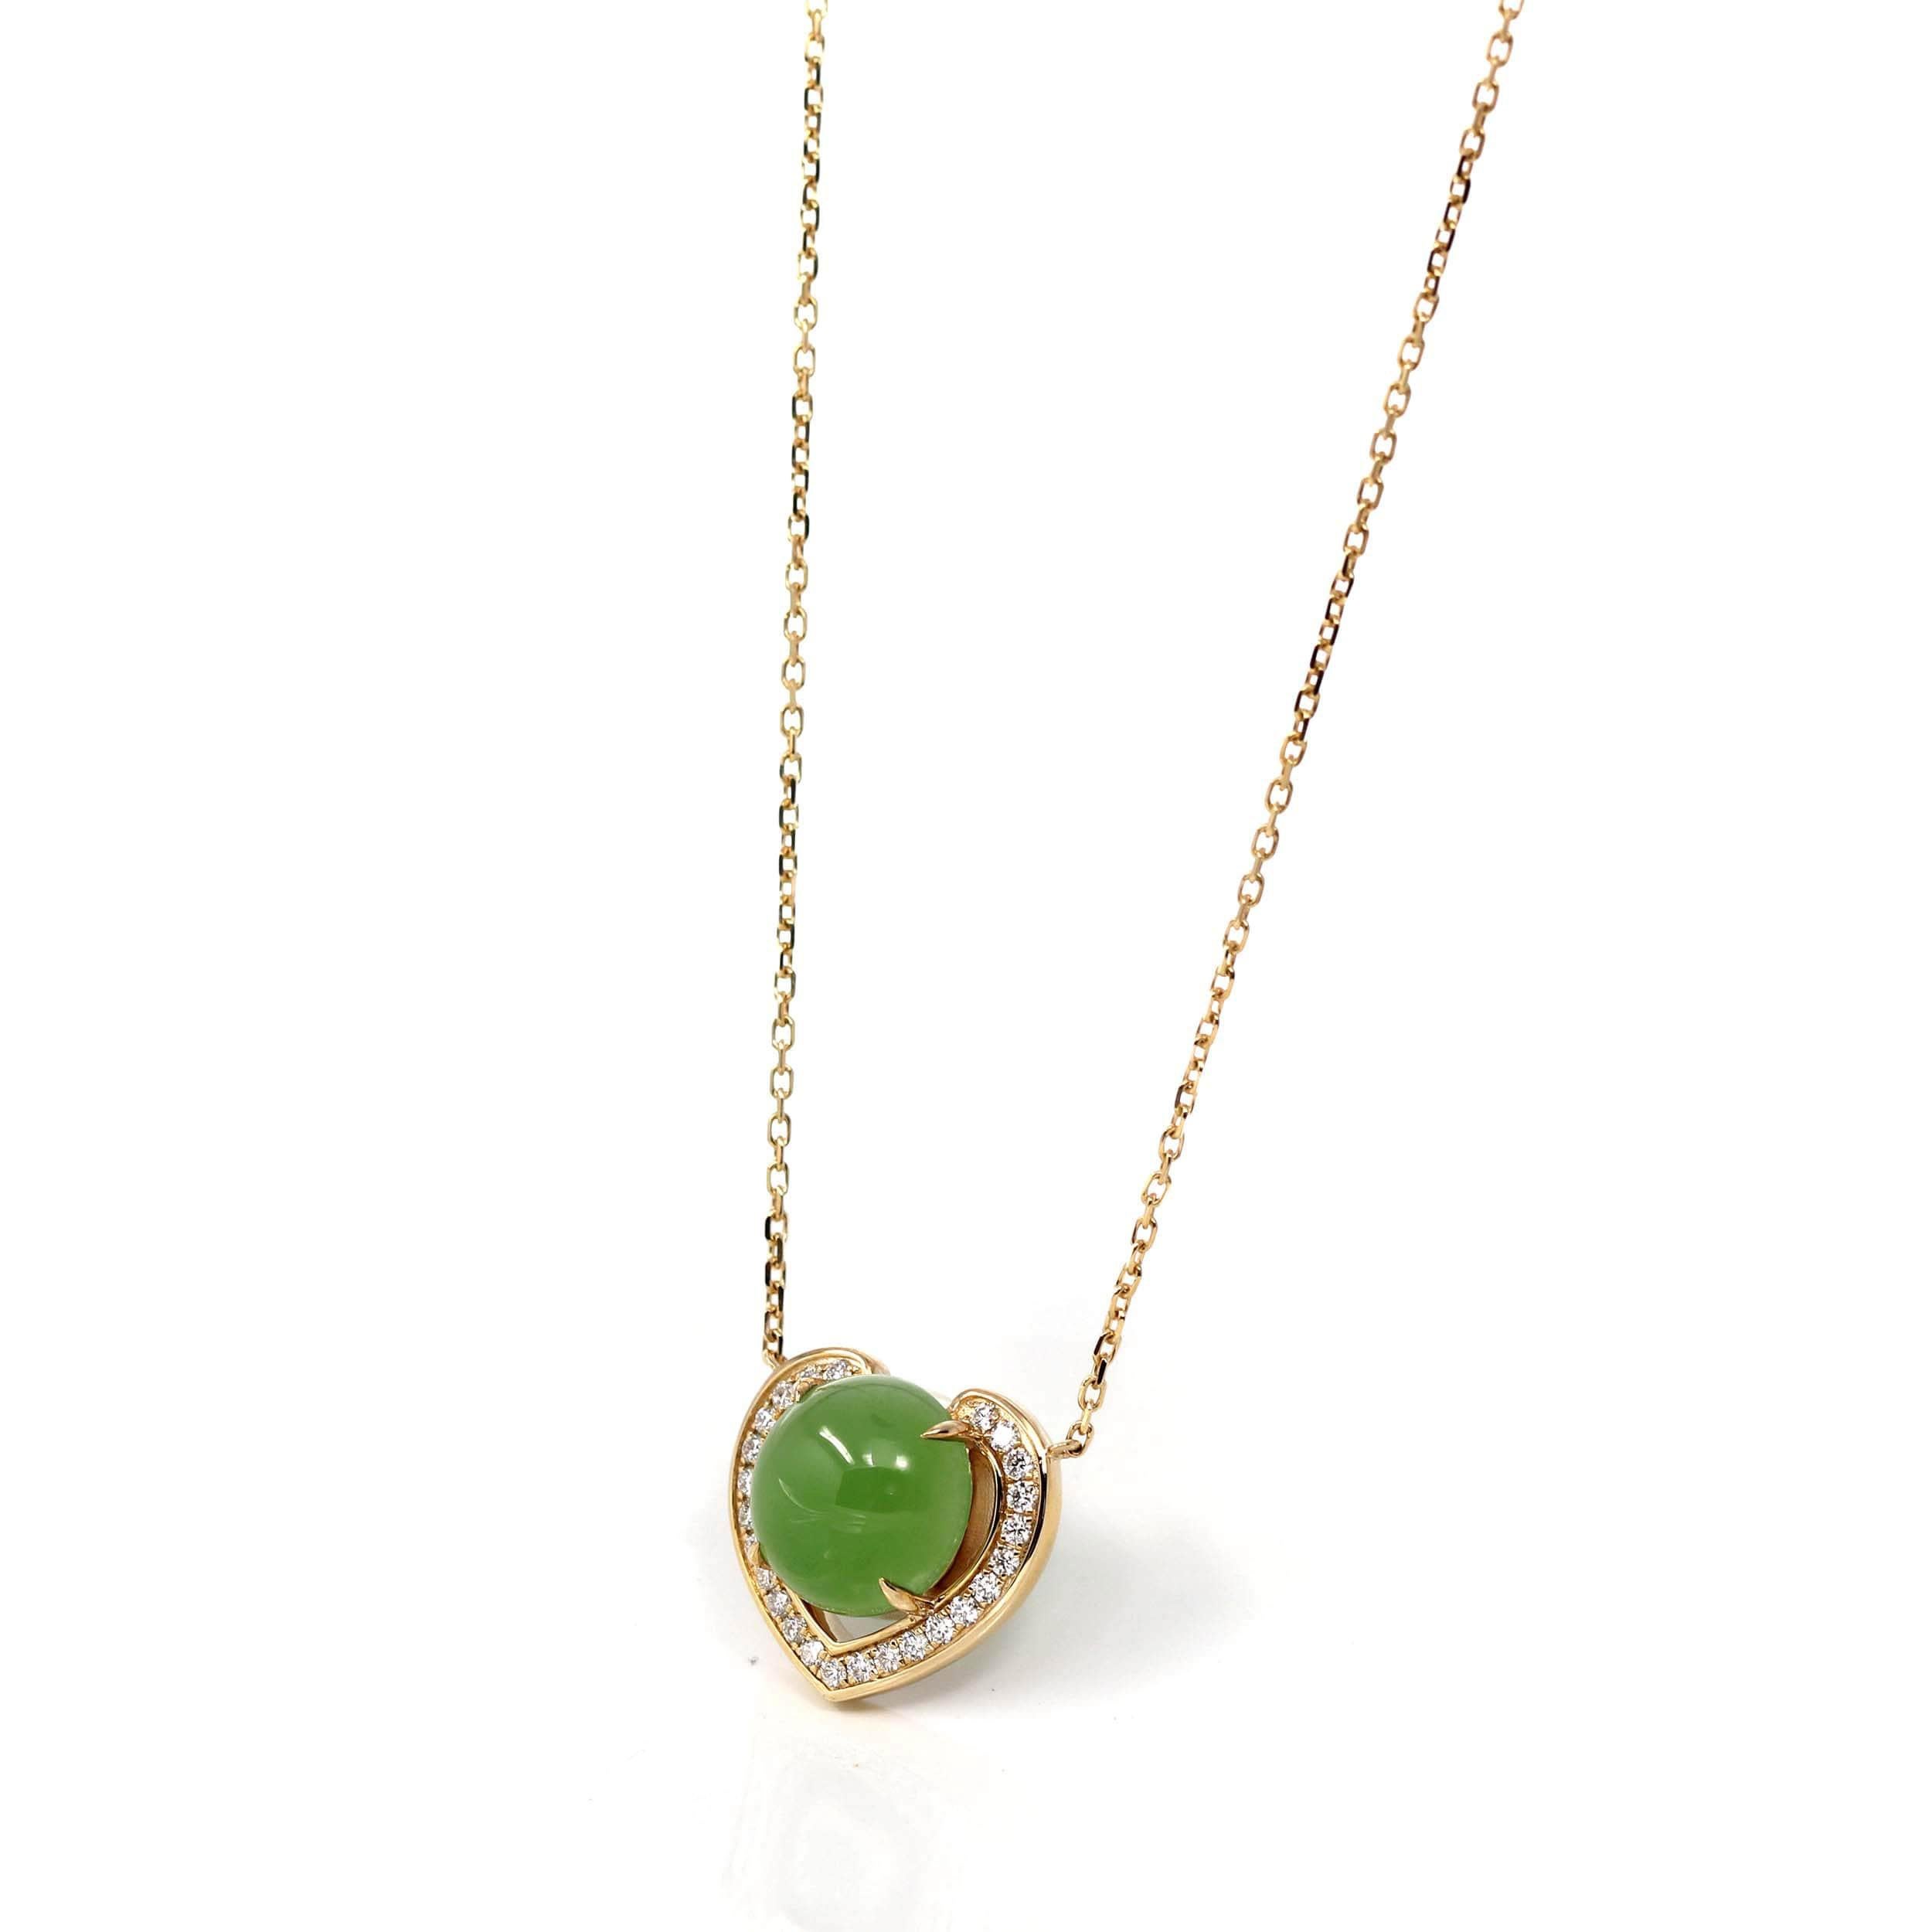 * INTRODUCTION----- This pendant is made with very high-quality genuine nephrite luxury apple green jade. It looks so luxurious and exquisite. The green jade looks so clean and smooth. And the color is lovely apple green. The style is simple and